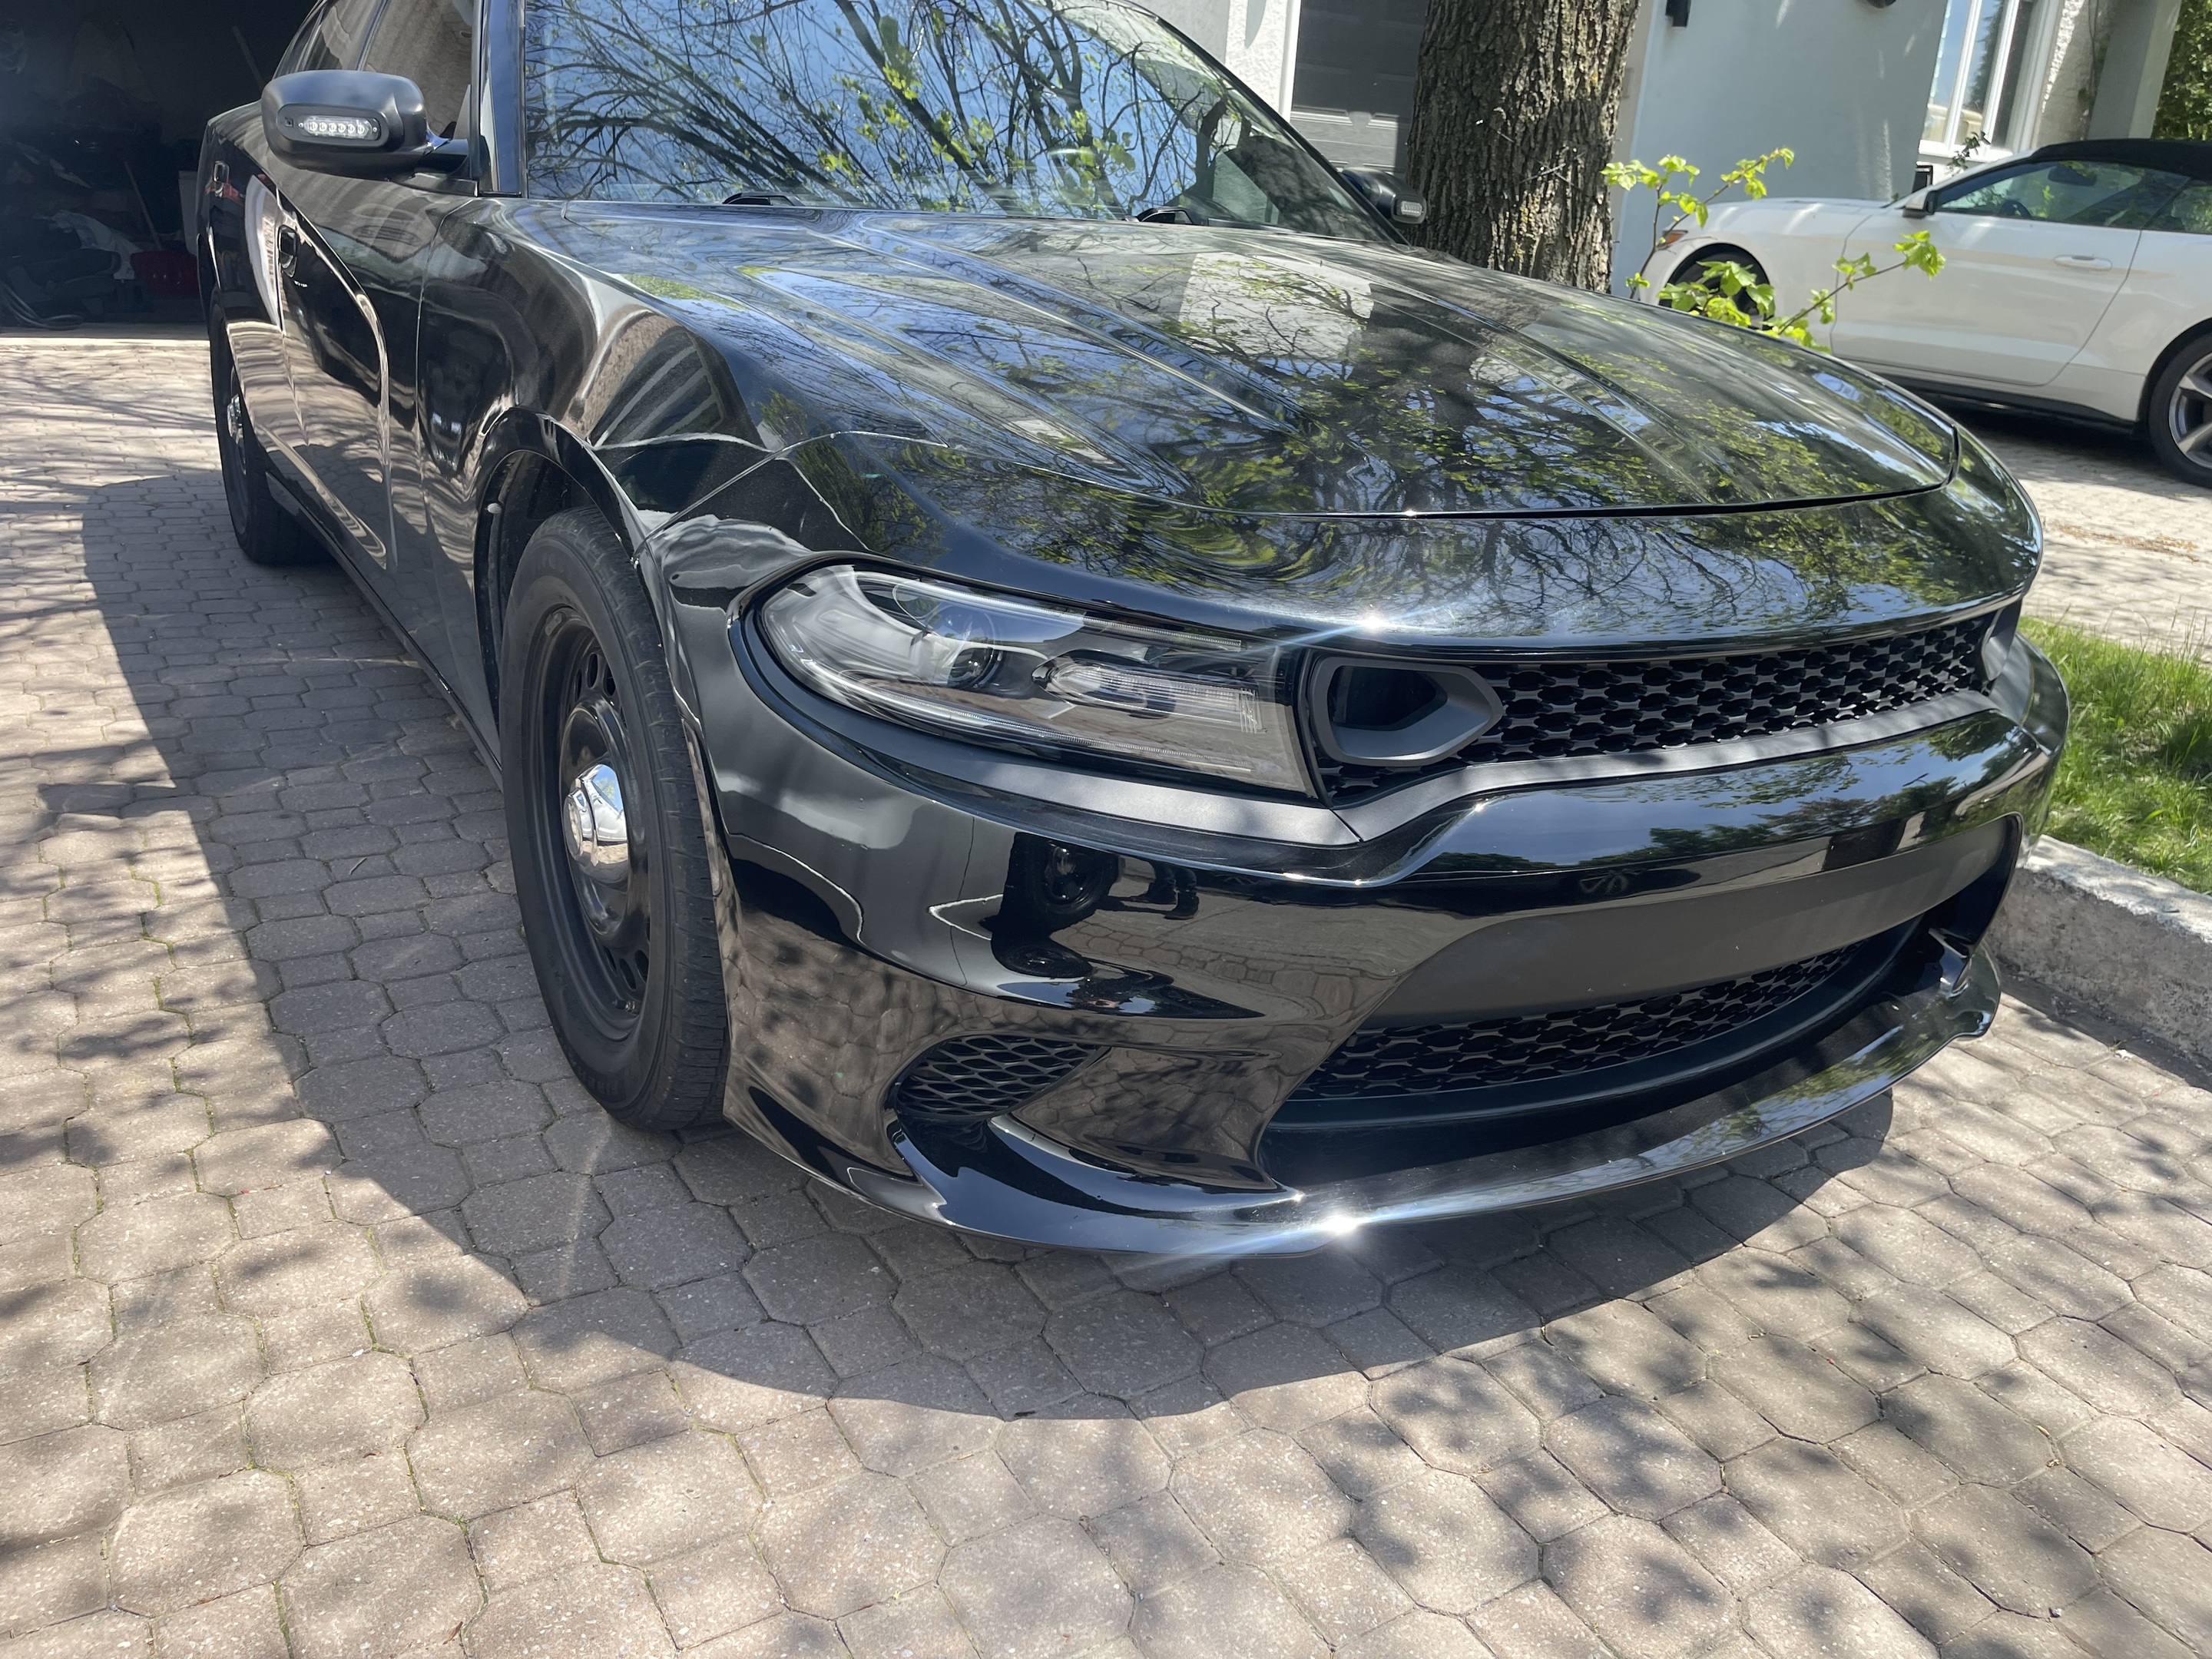 2016 Dodge Charger Police poursuit V8 awd